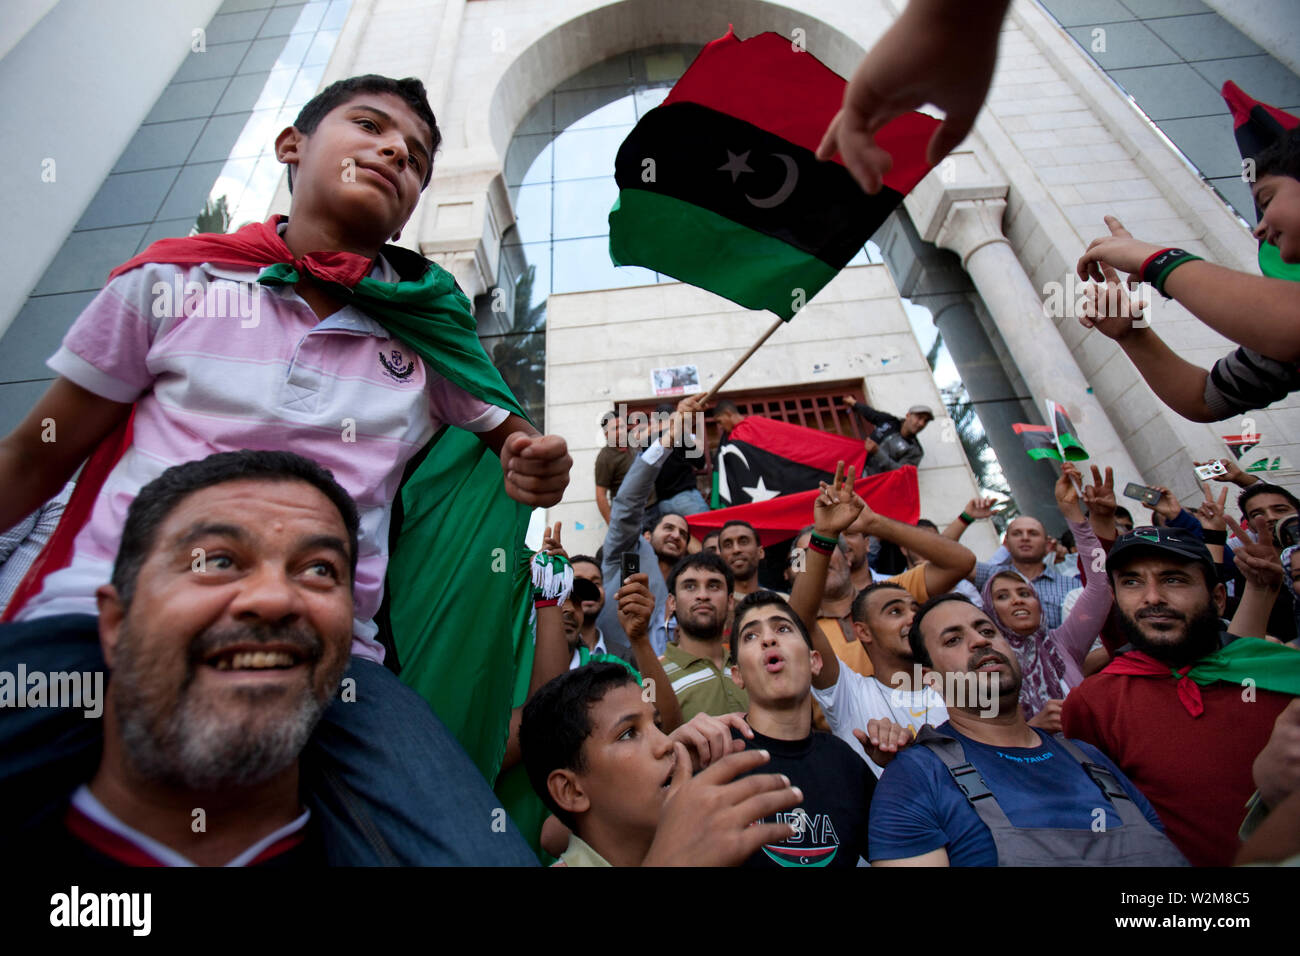 October 20, 2011 – Tunis, Tunisia - A number of Libyan nationals have gathered outside the Libyan embassy in Tunis, to celebrate the reports that Muammar Gaddafi had been captured, possibly killed in his home town of Sirt, where rebels have fought a grueling battle for weeks to crush his remaining armed loyalists. Photo credit: Benedicte Desrus Stock Photo